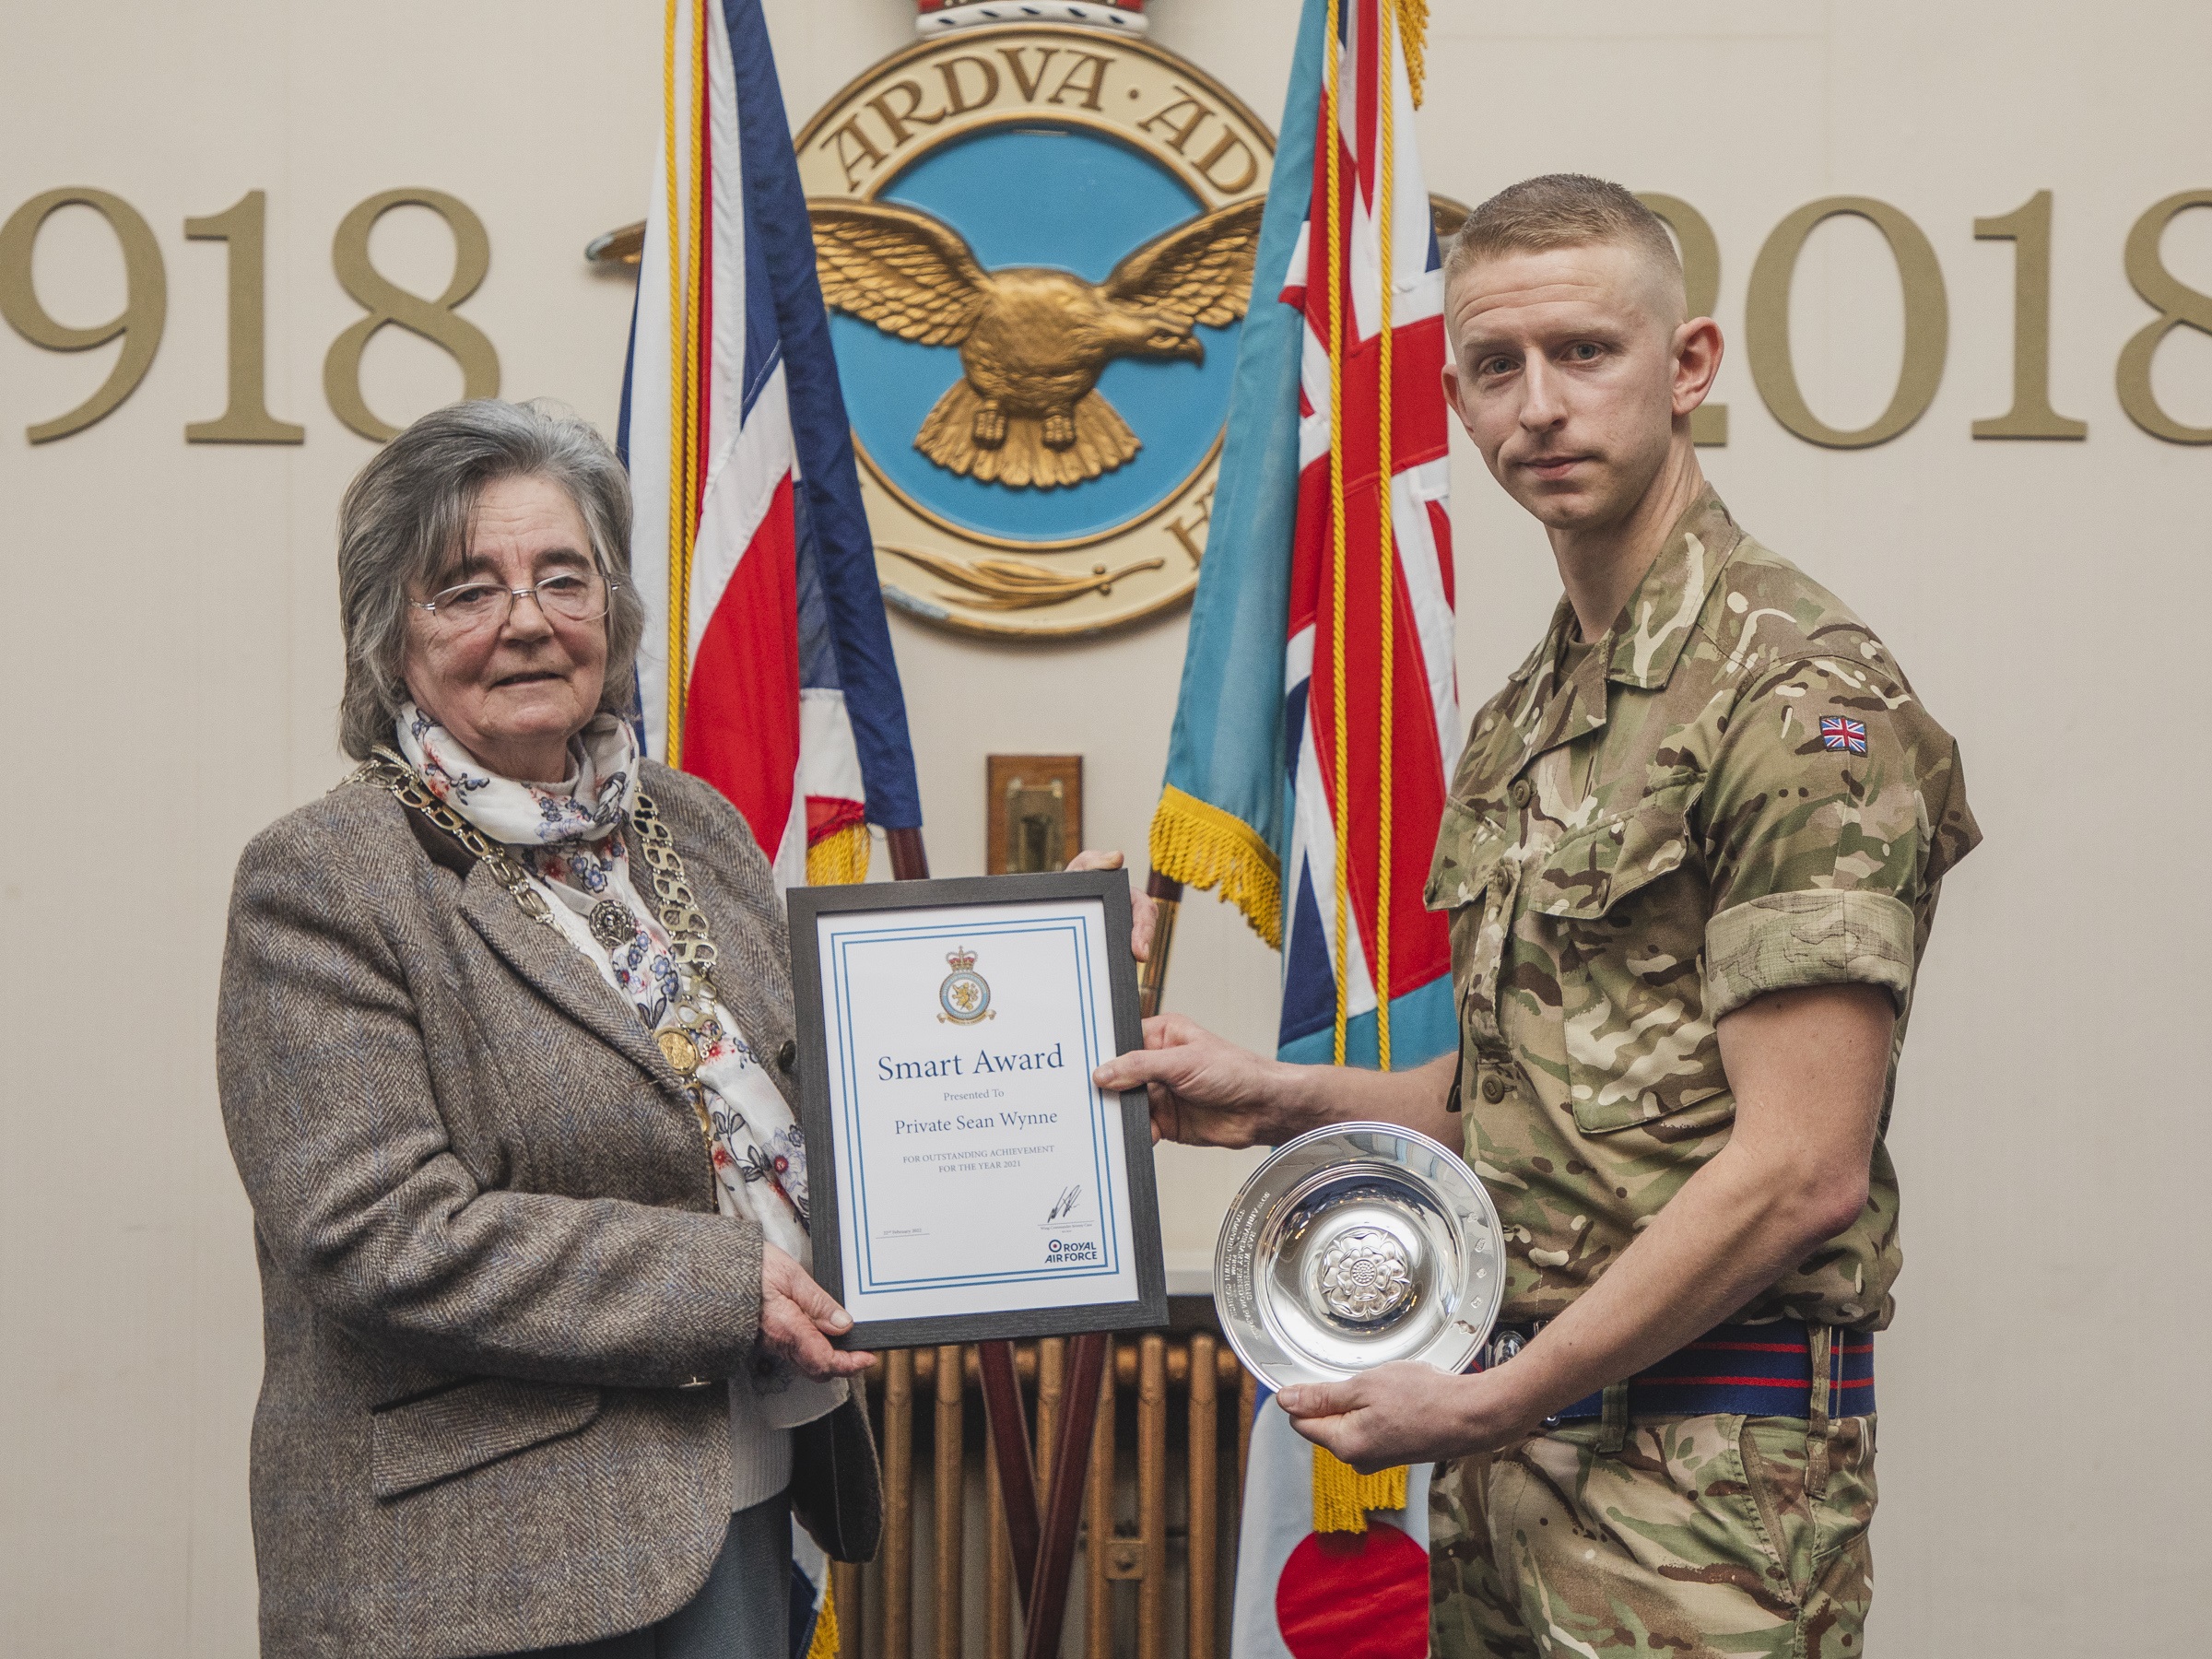 Private Sean Wynne accepts the Smart Award from the Mayor of Stamford, Councillor Gloria Johnson